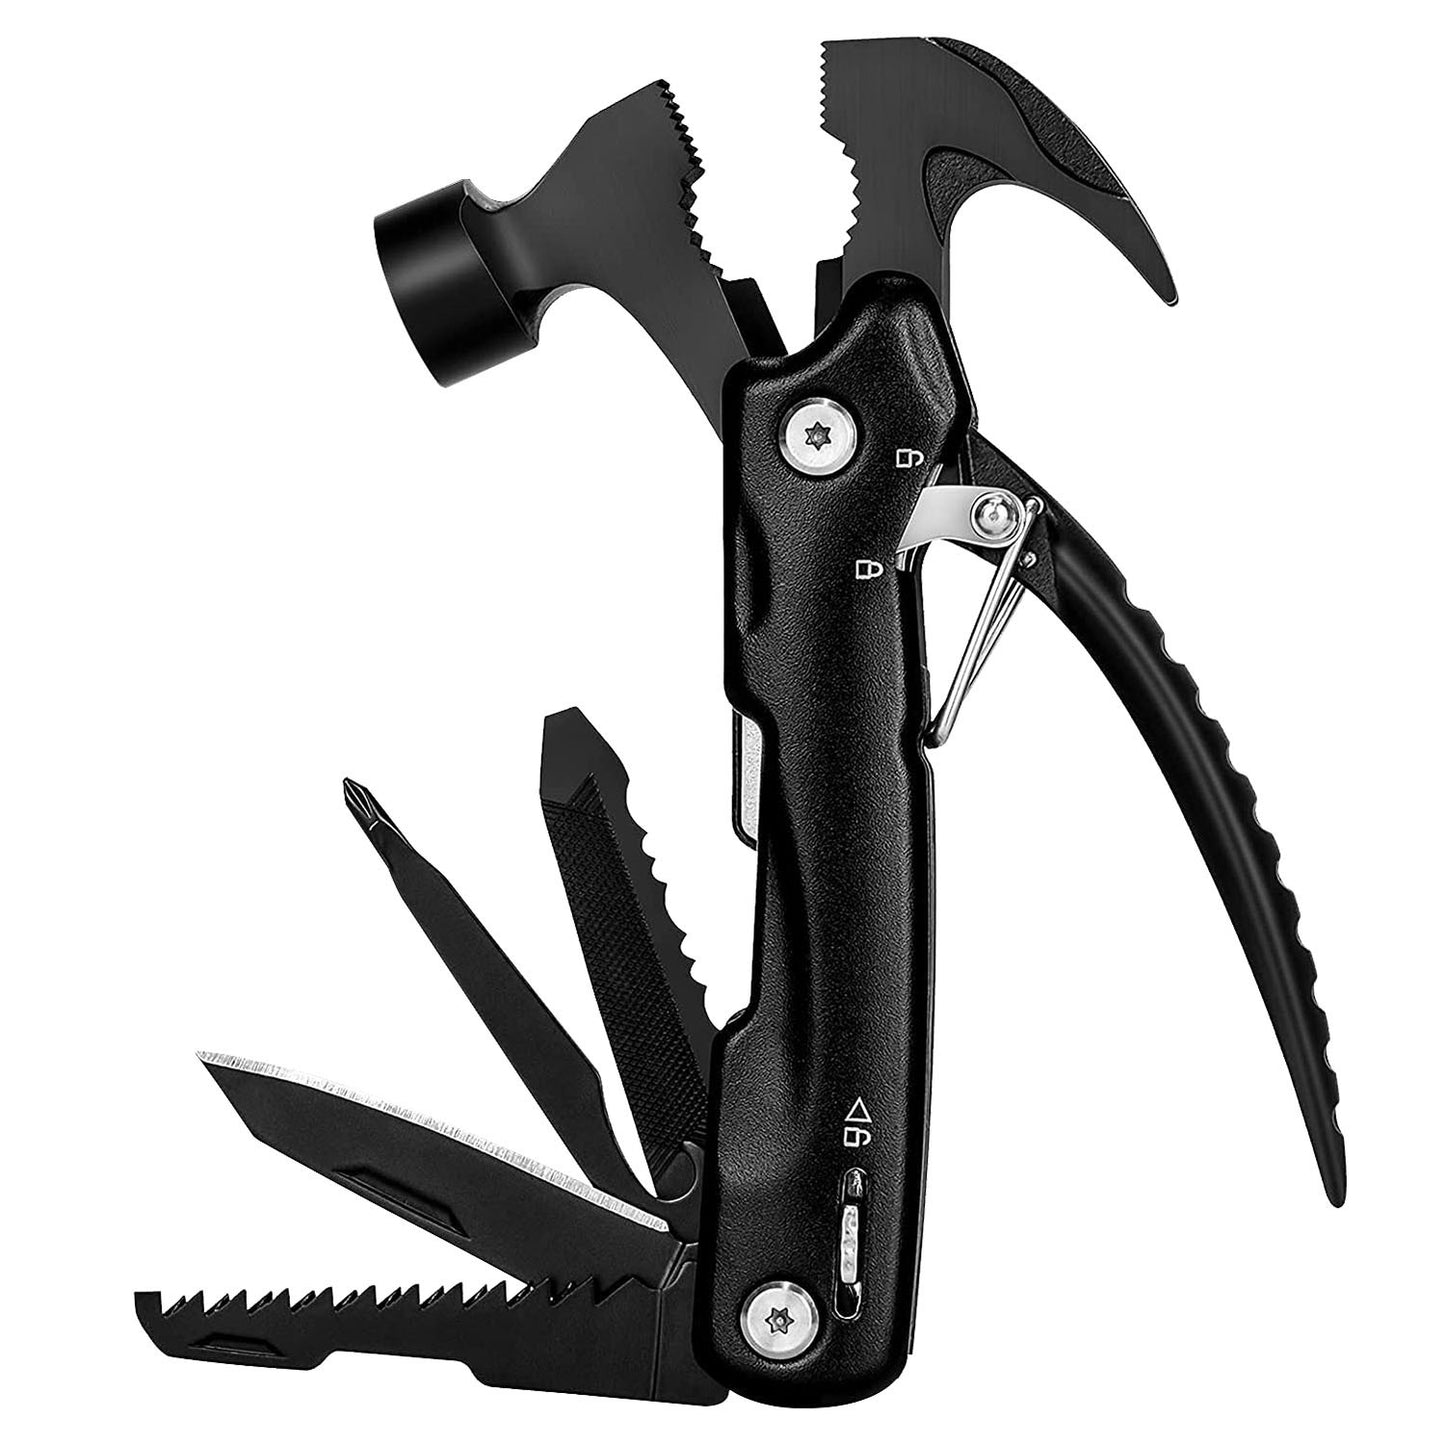 12 in 1 Hammer Multitool Portable Stainless Steel - DragonHearth